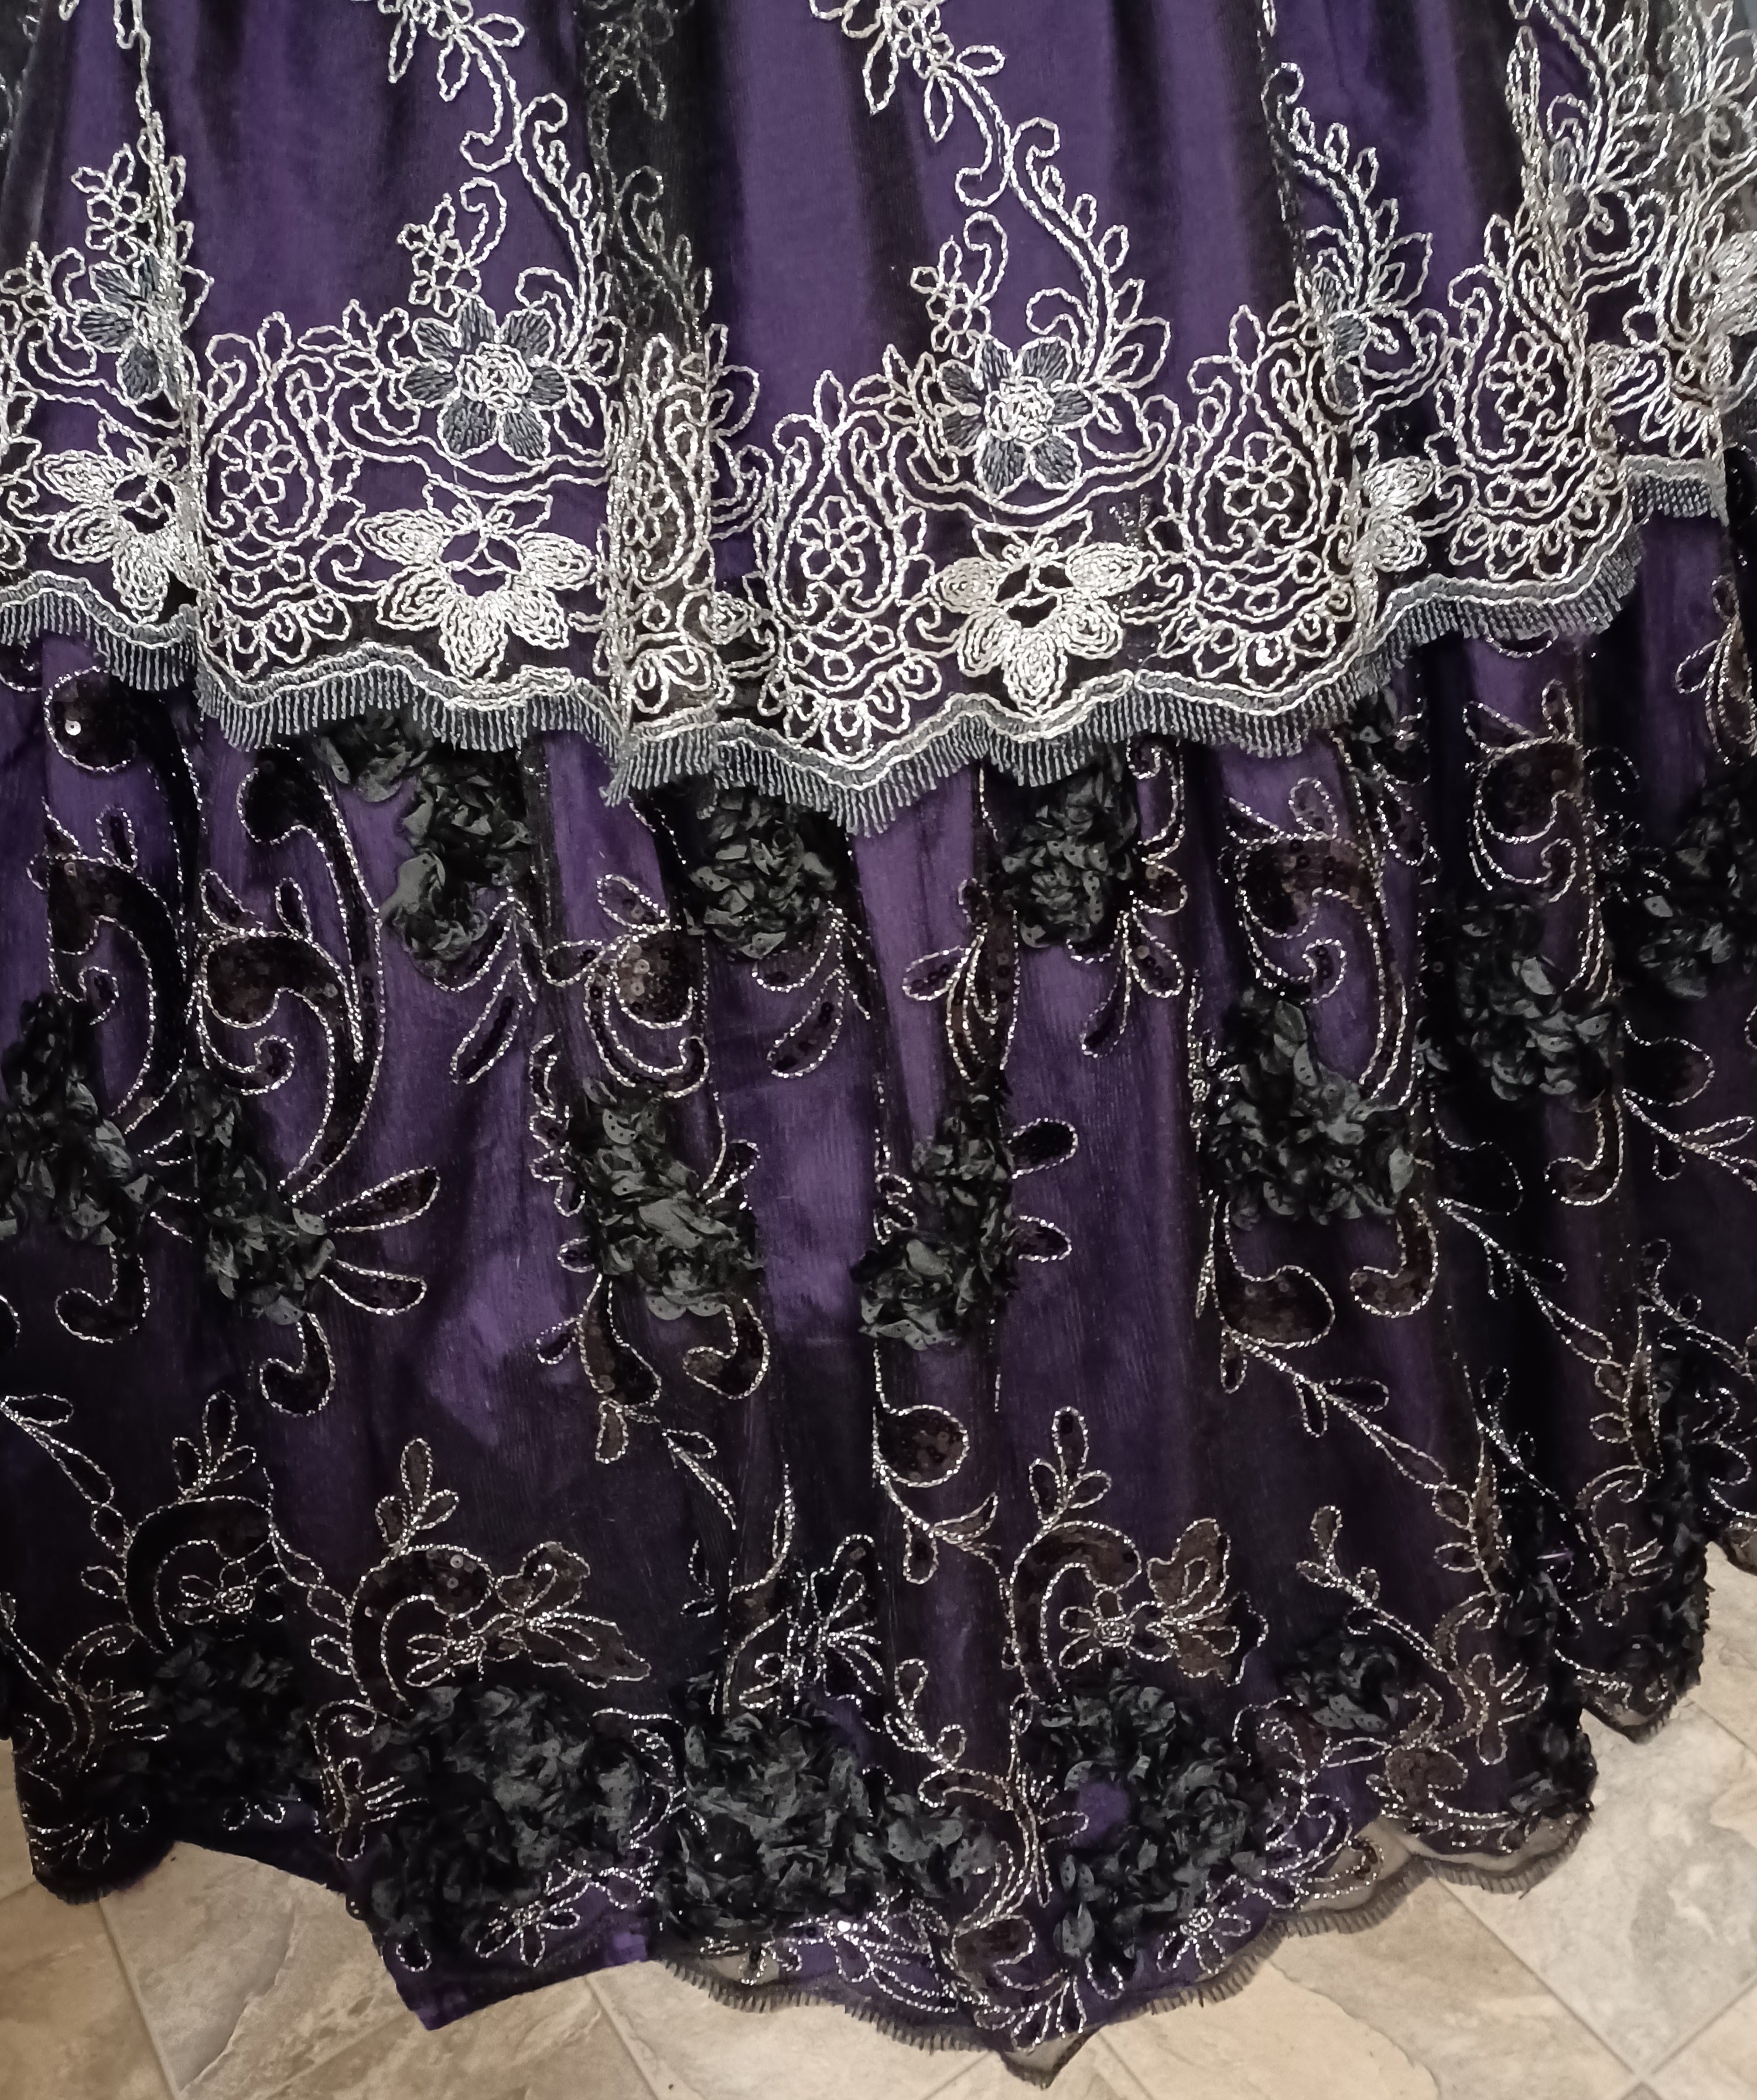 Sale!  Purple, Black and Silver Gothic Victorian Gown -Medium